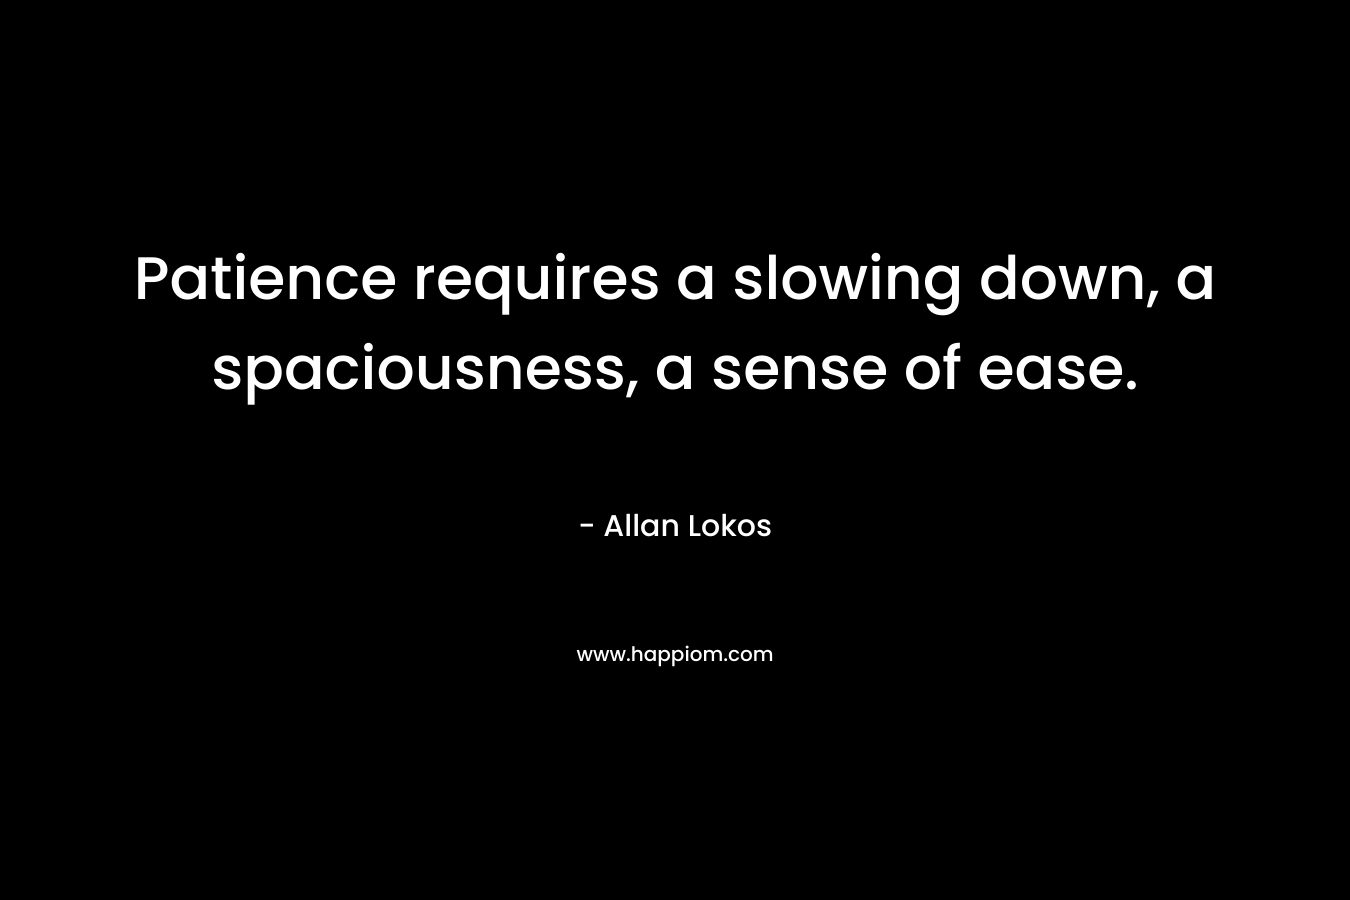 Patience requires a slowing down, a spaciousness, a sense of ease. – Allan Lokos